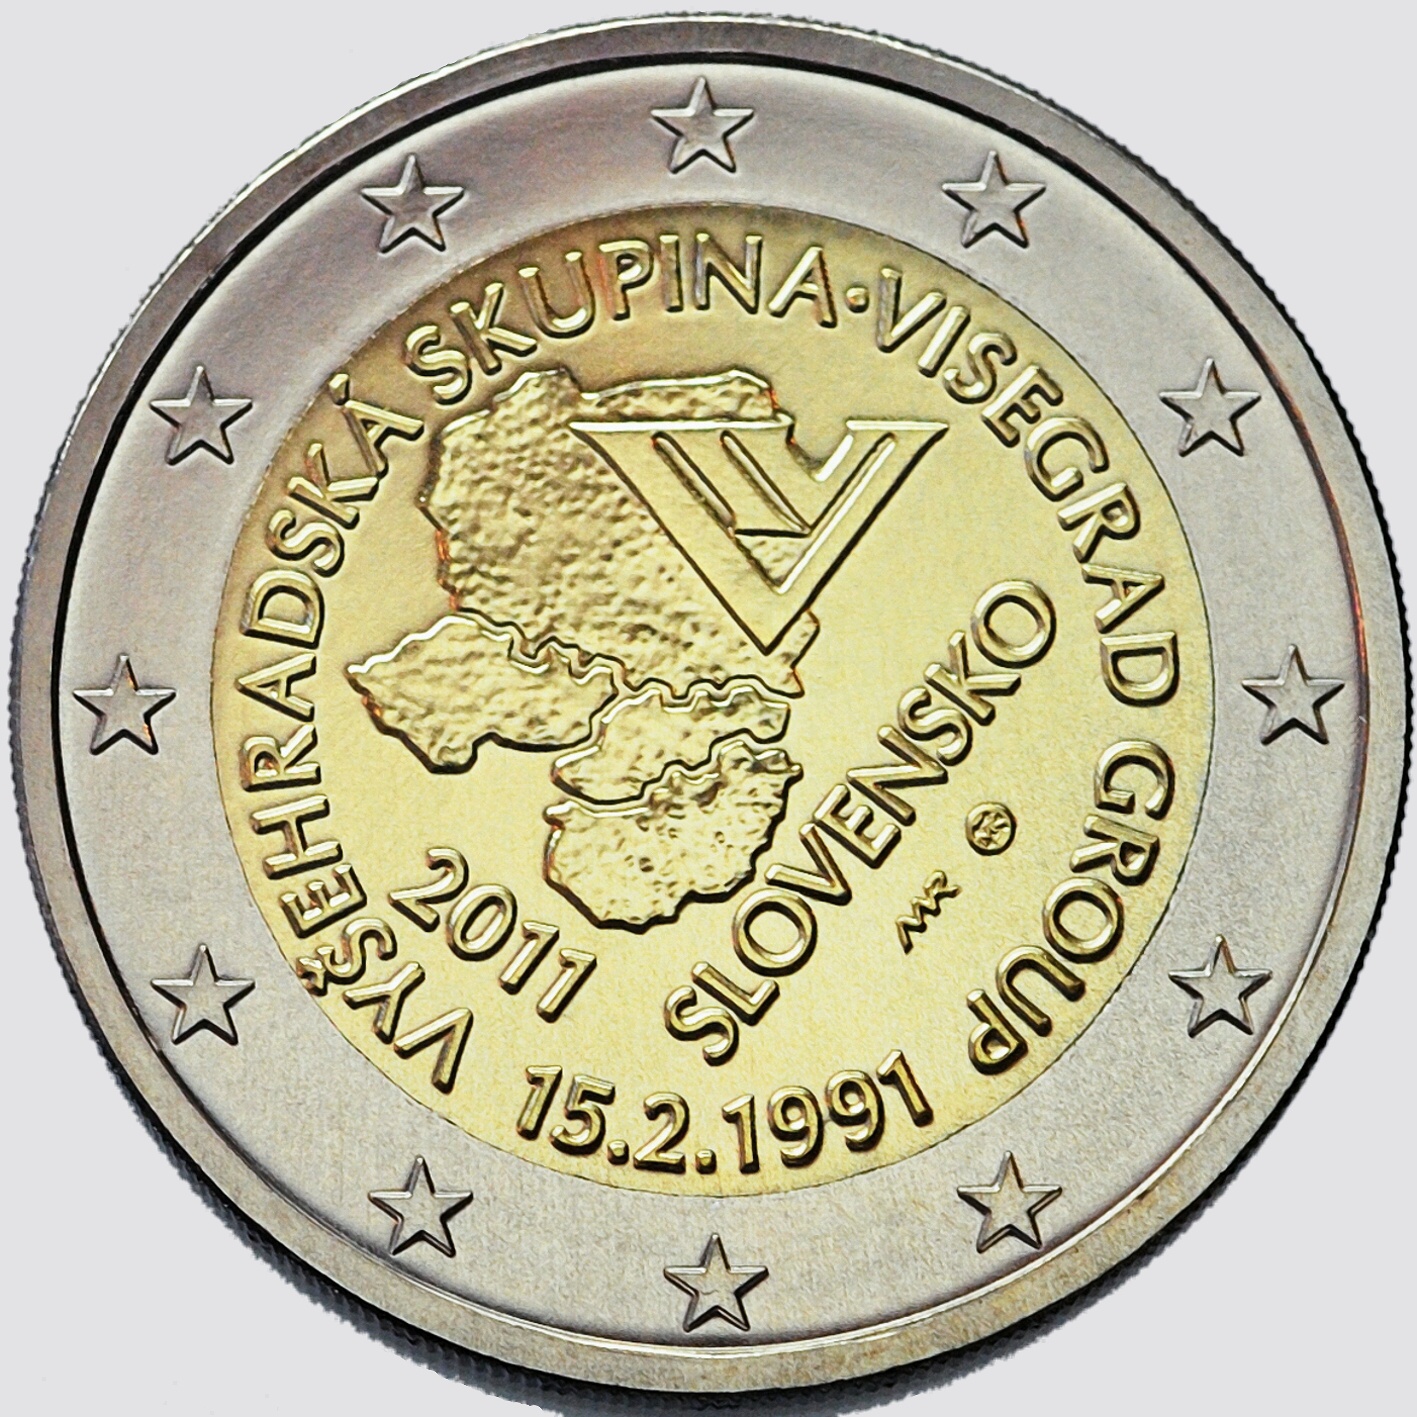 Banknotes and coins, 20th anniversary of the formation of the Visegrád Group